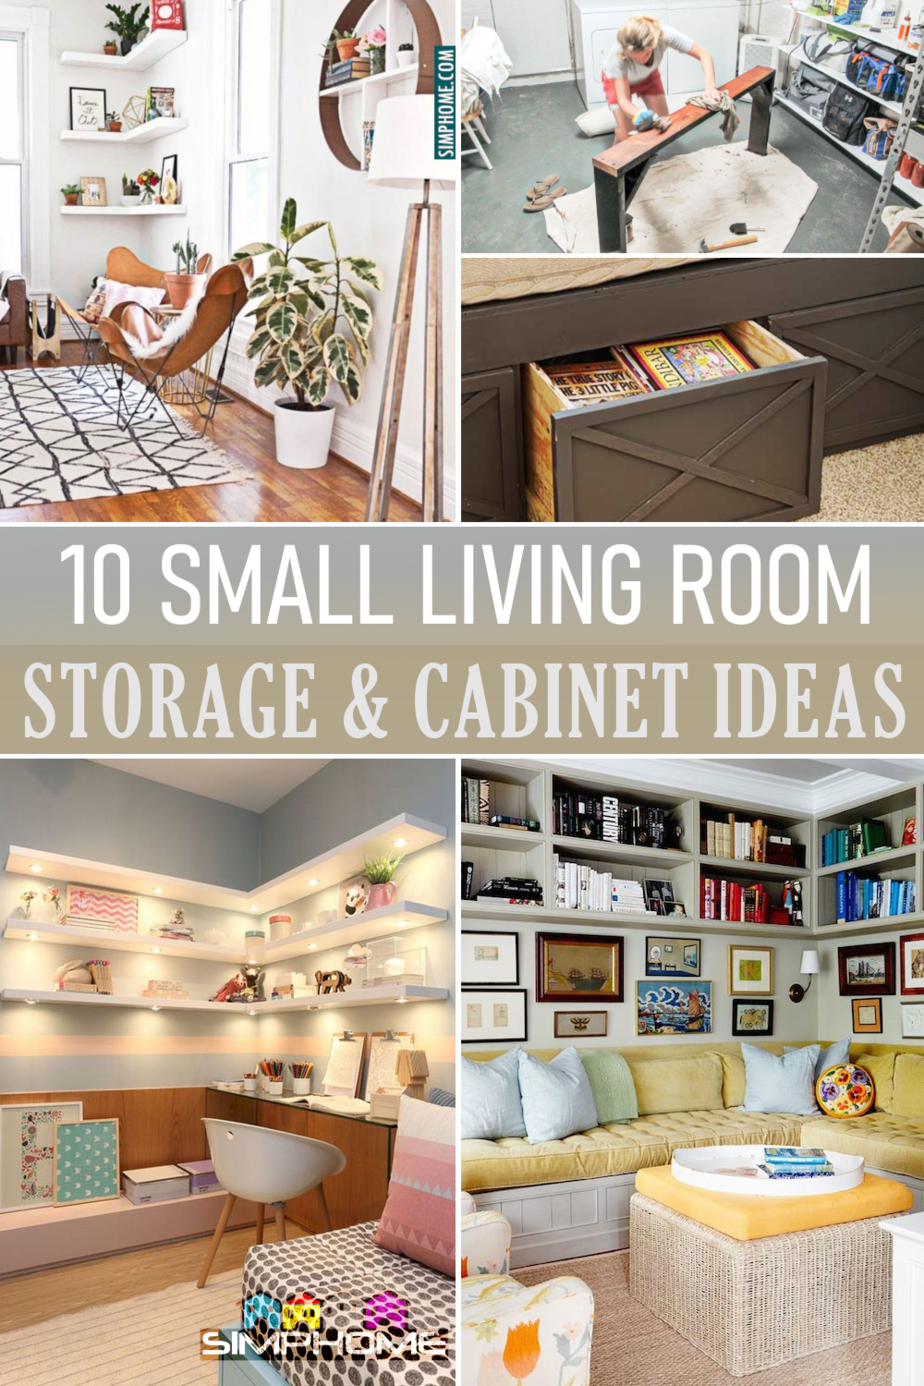 10 small living room storage and cabinet via Simphome.com Featured